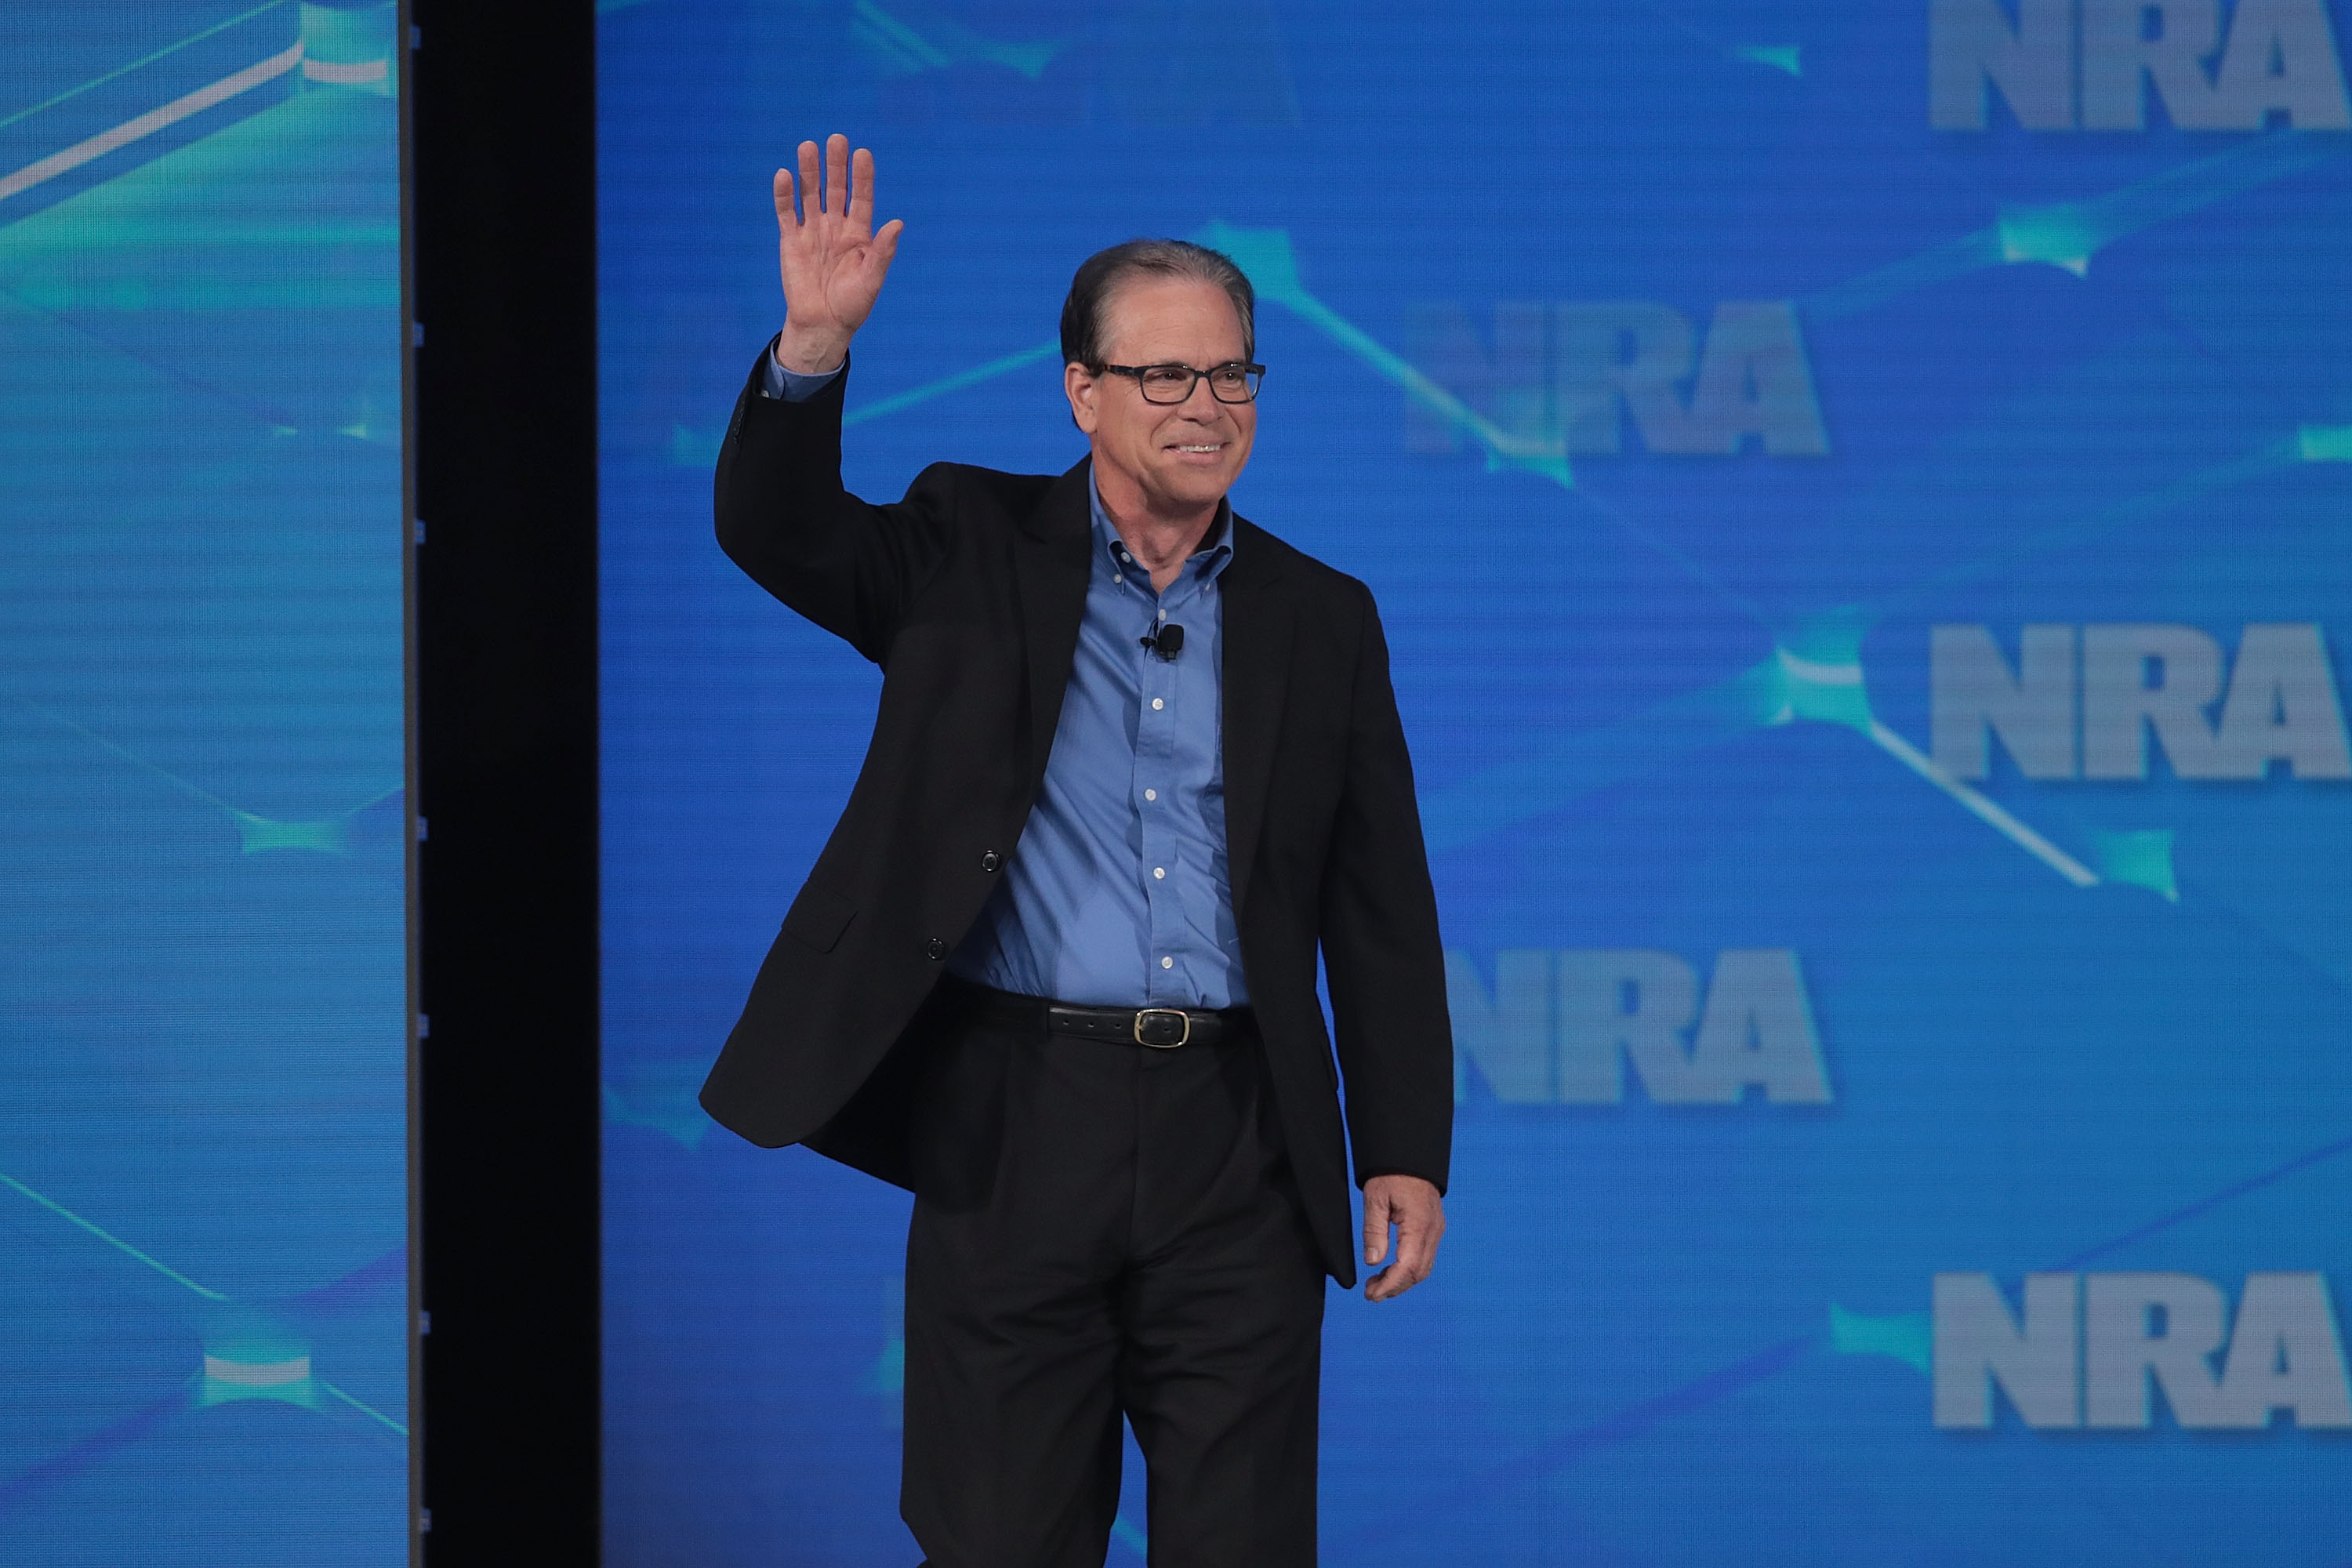 Senator Mike Braun speaks to guests during the NRA-ILA Leadership Forum at the 148th NRA Annual Meetings & Exhibits on April 26, 2019 in Indianapolis, Indiana. (Photo by Scott Olson/Getty Images)